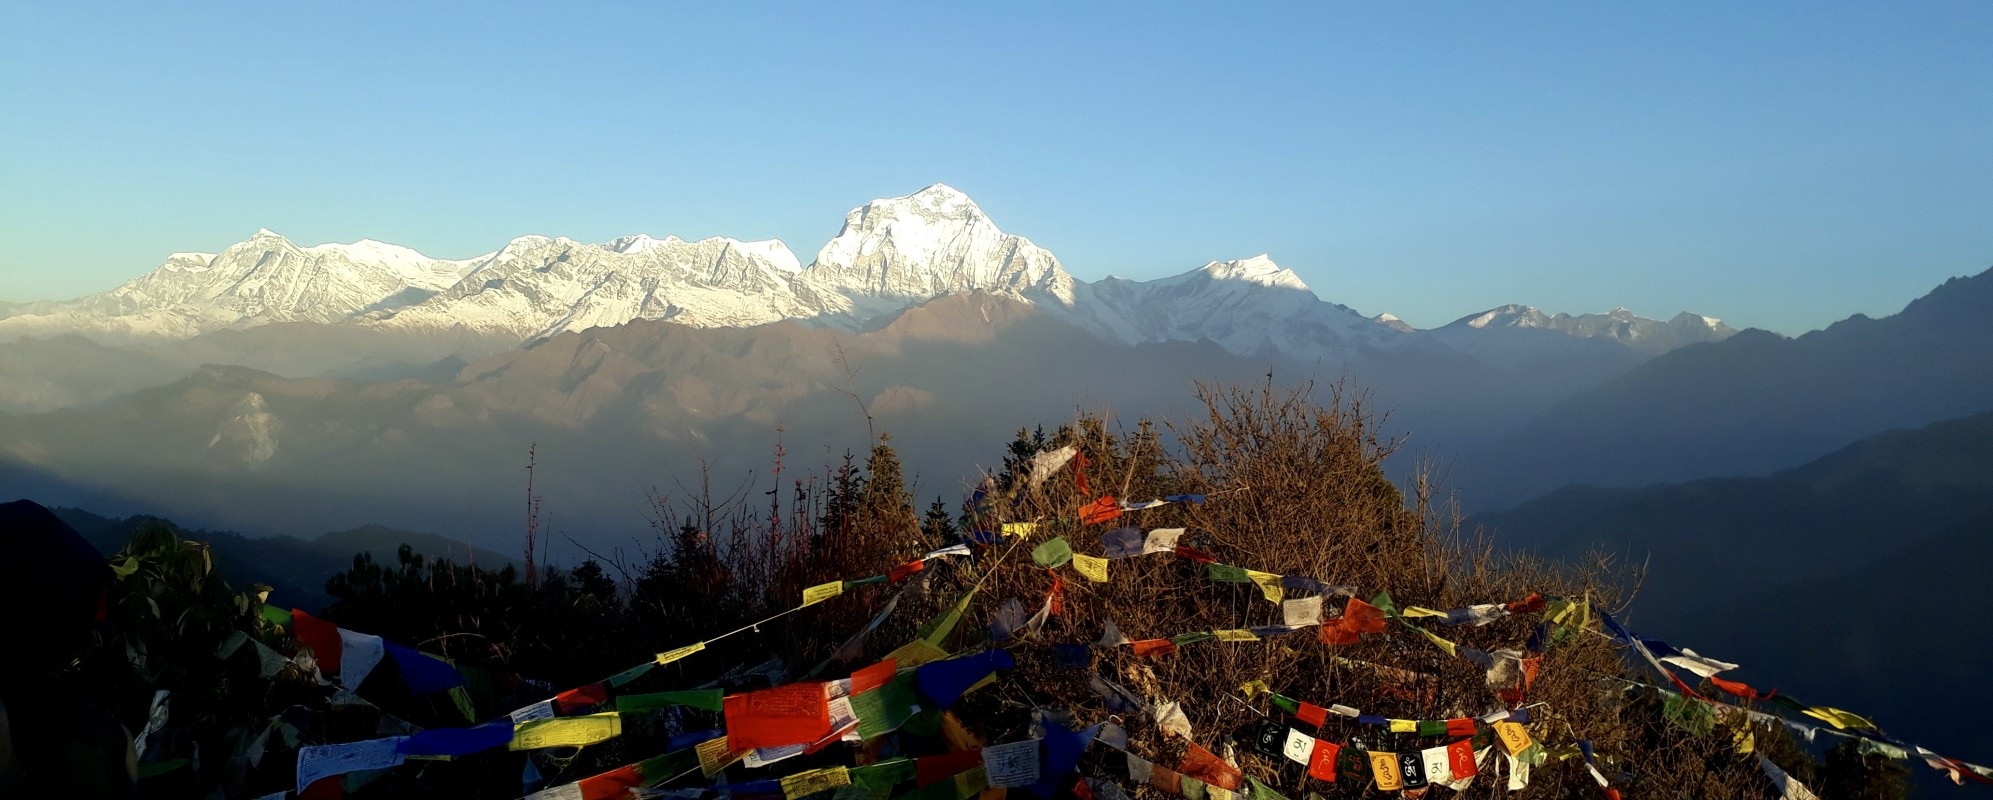 Poon Hill and Muldai Viewpoints Trekking